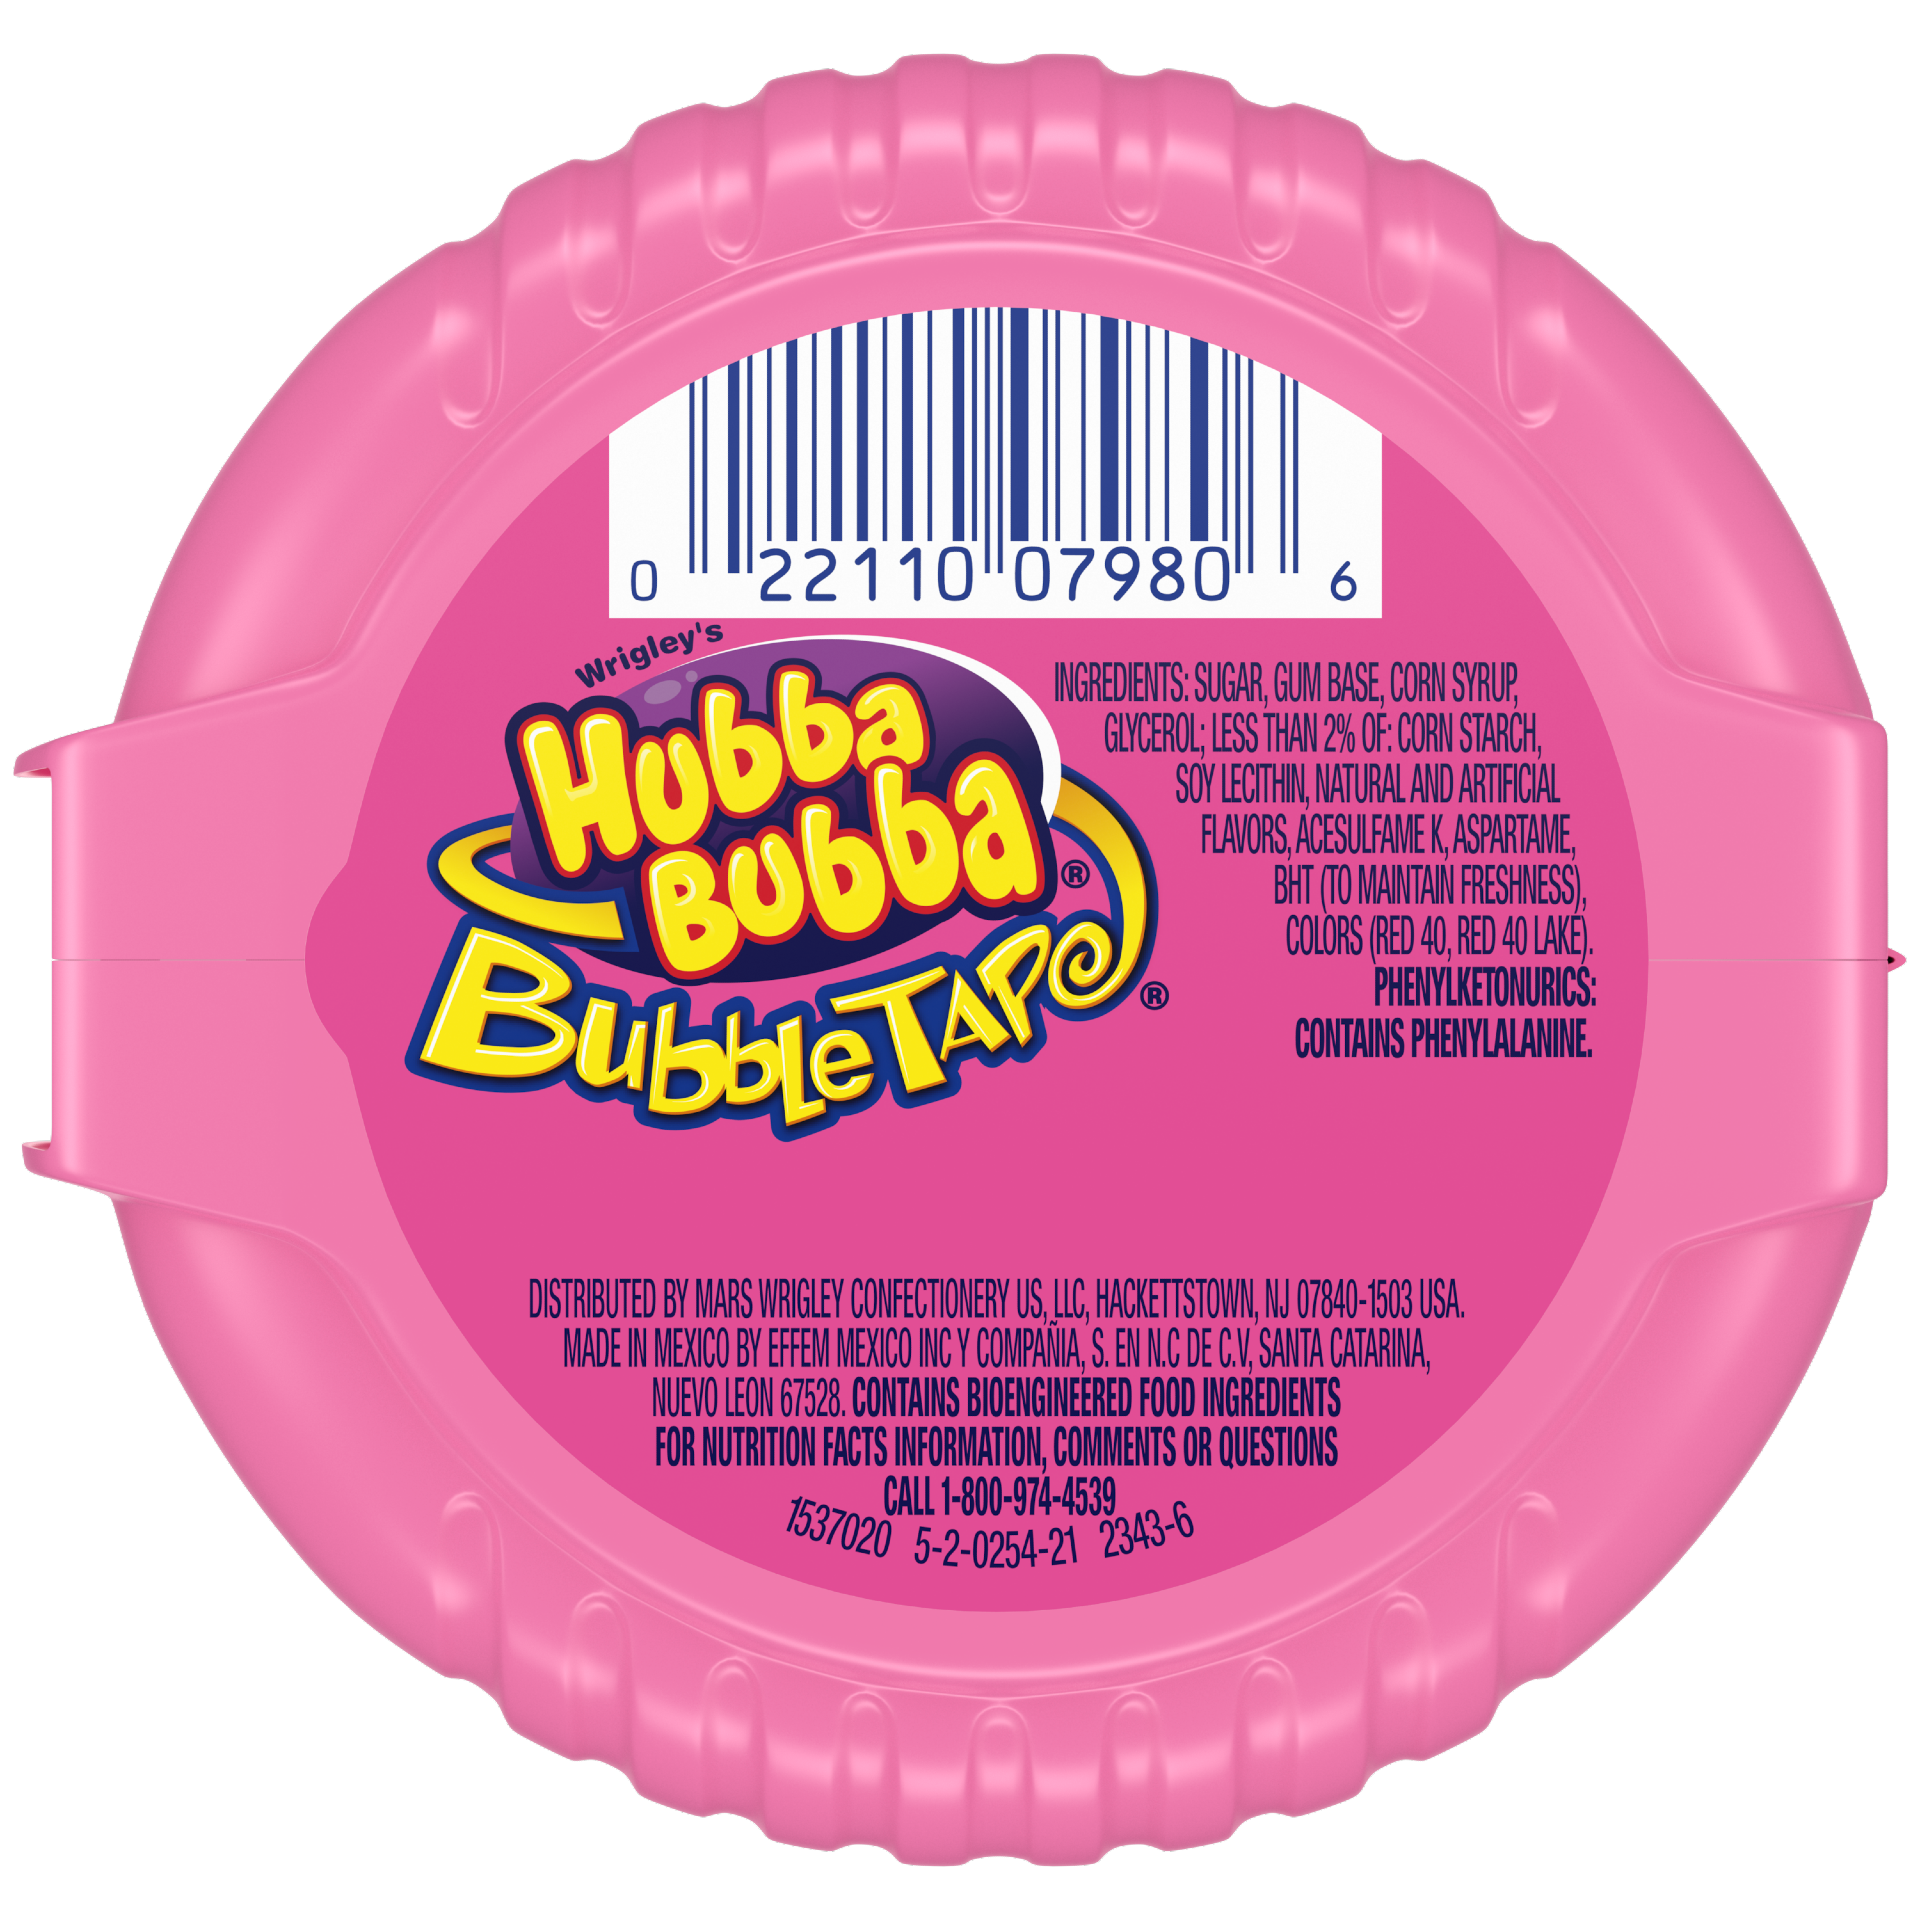 Hubba Bubba Bubble Gum Tape Christmas Candy Chewing Gum, 2 oz